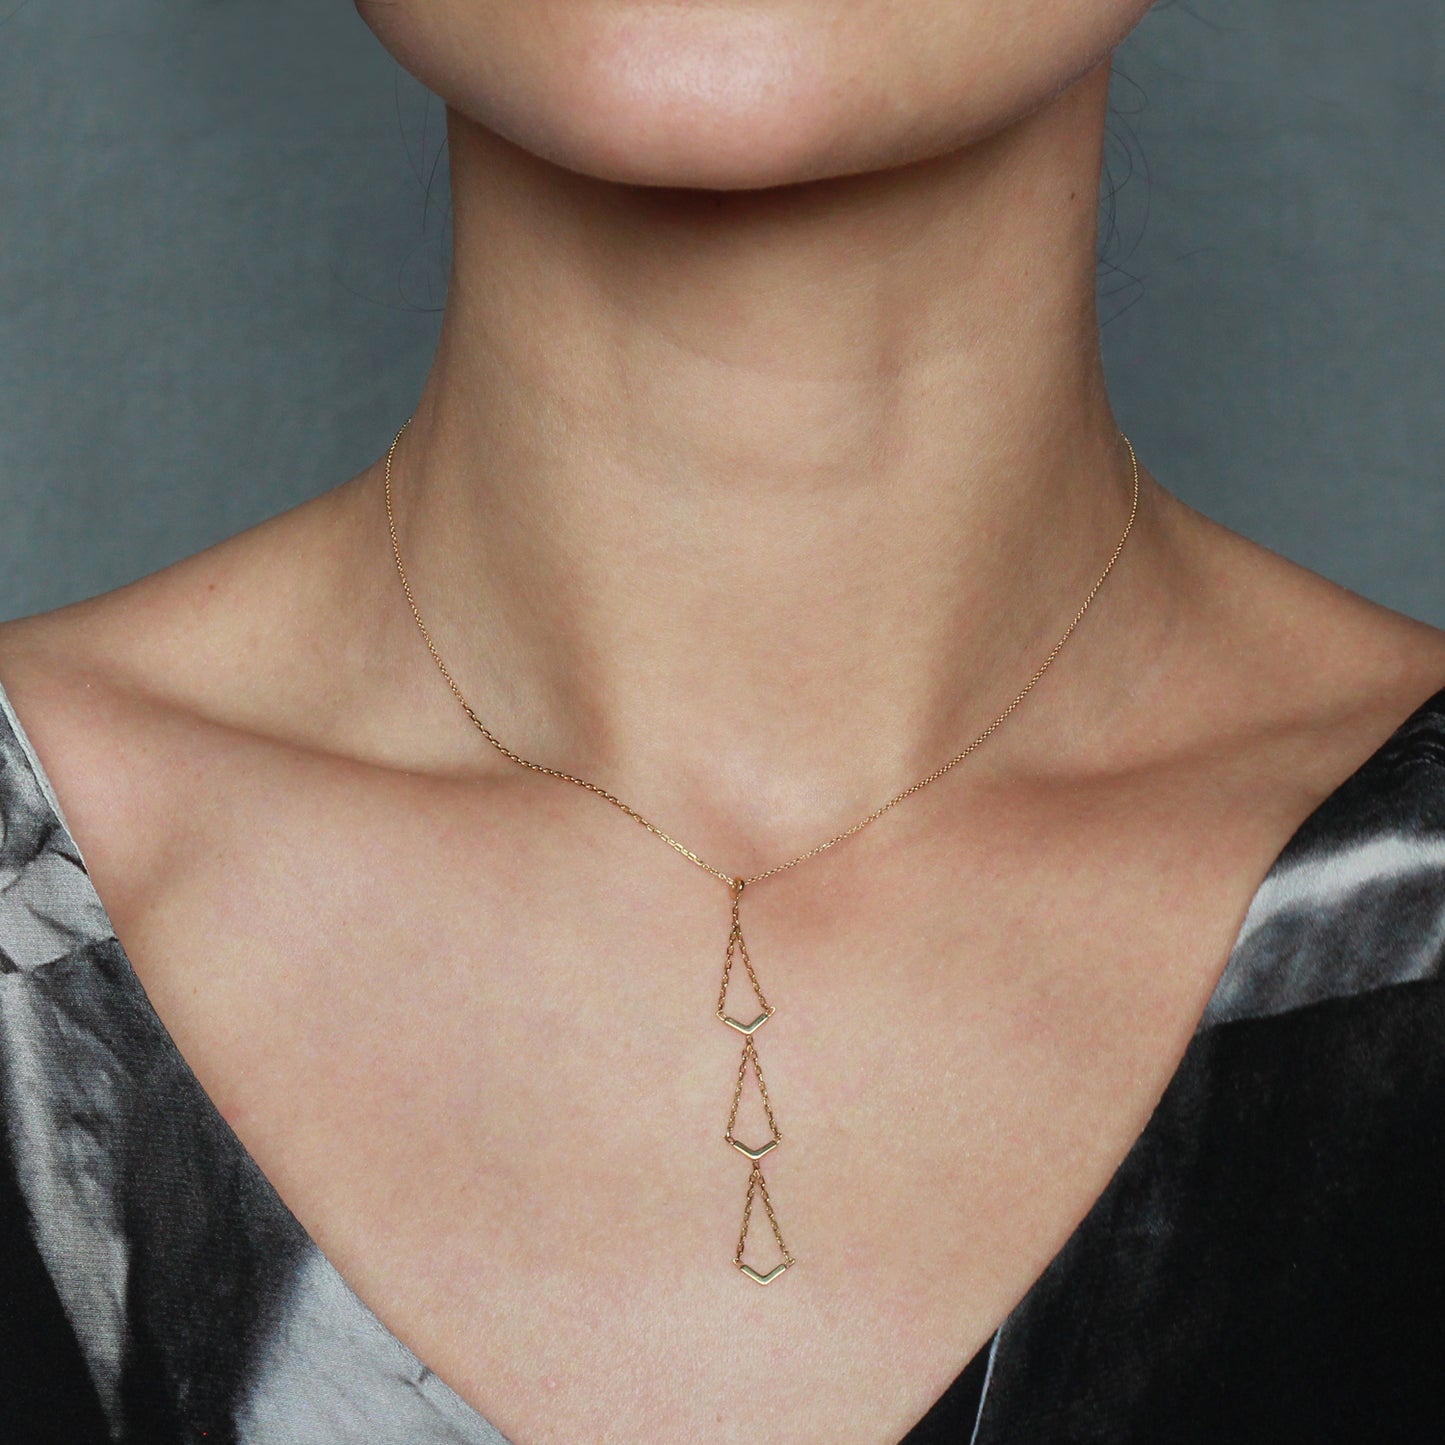 18ct yellow gold necklace with triple V-shaped drops  